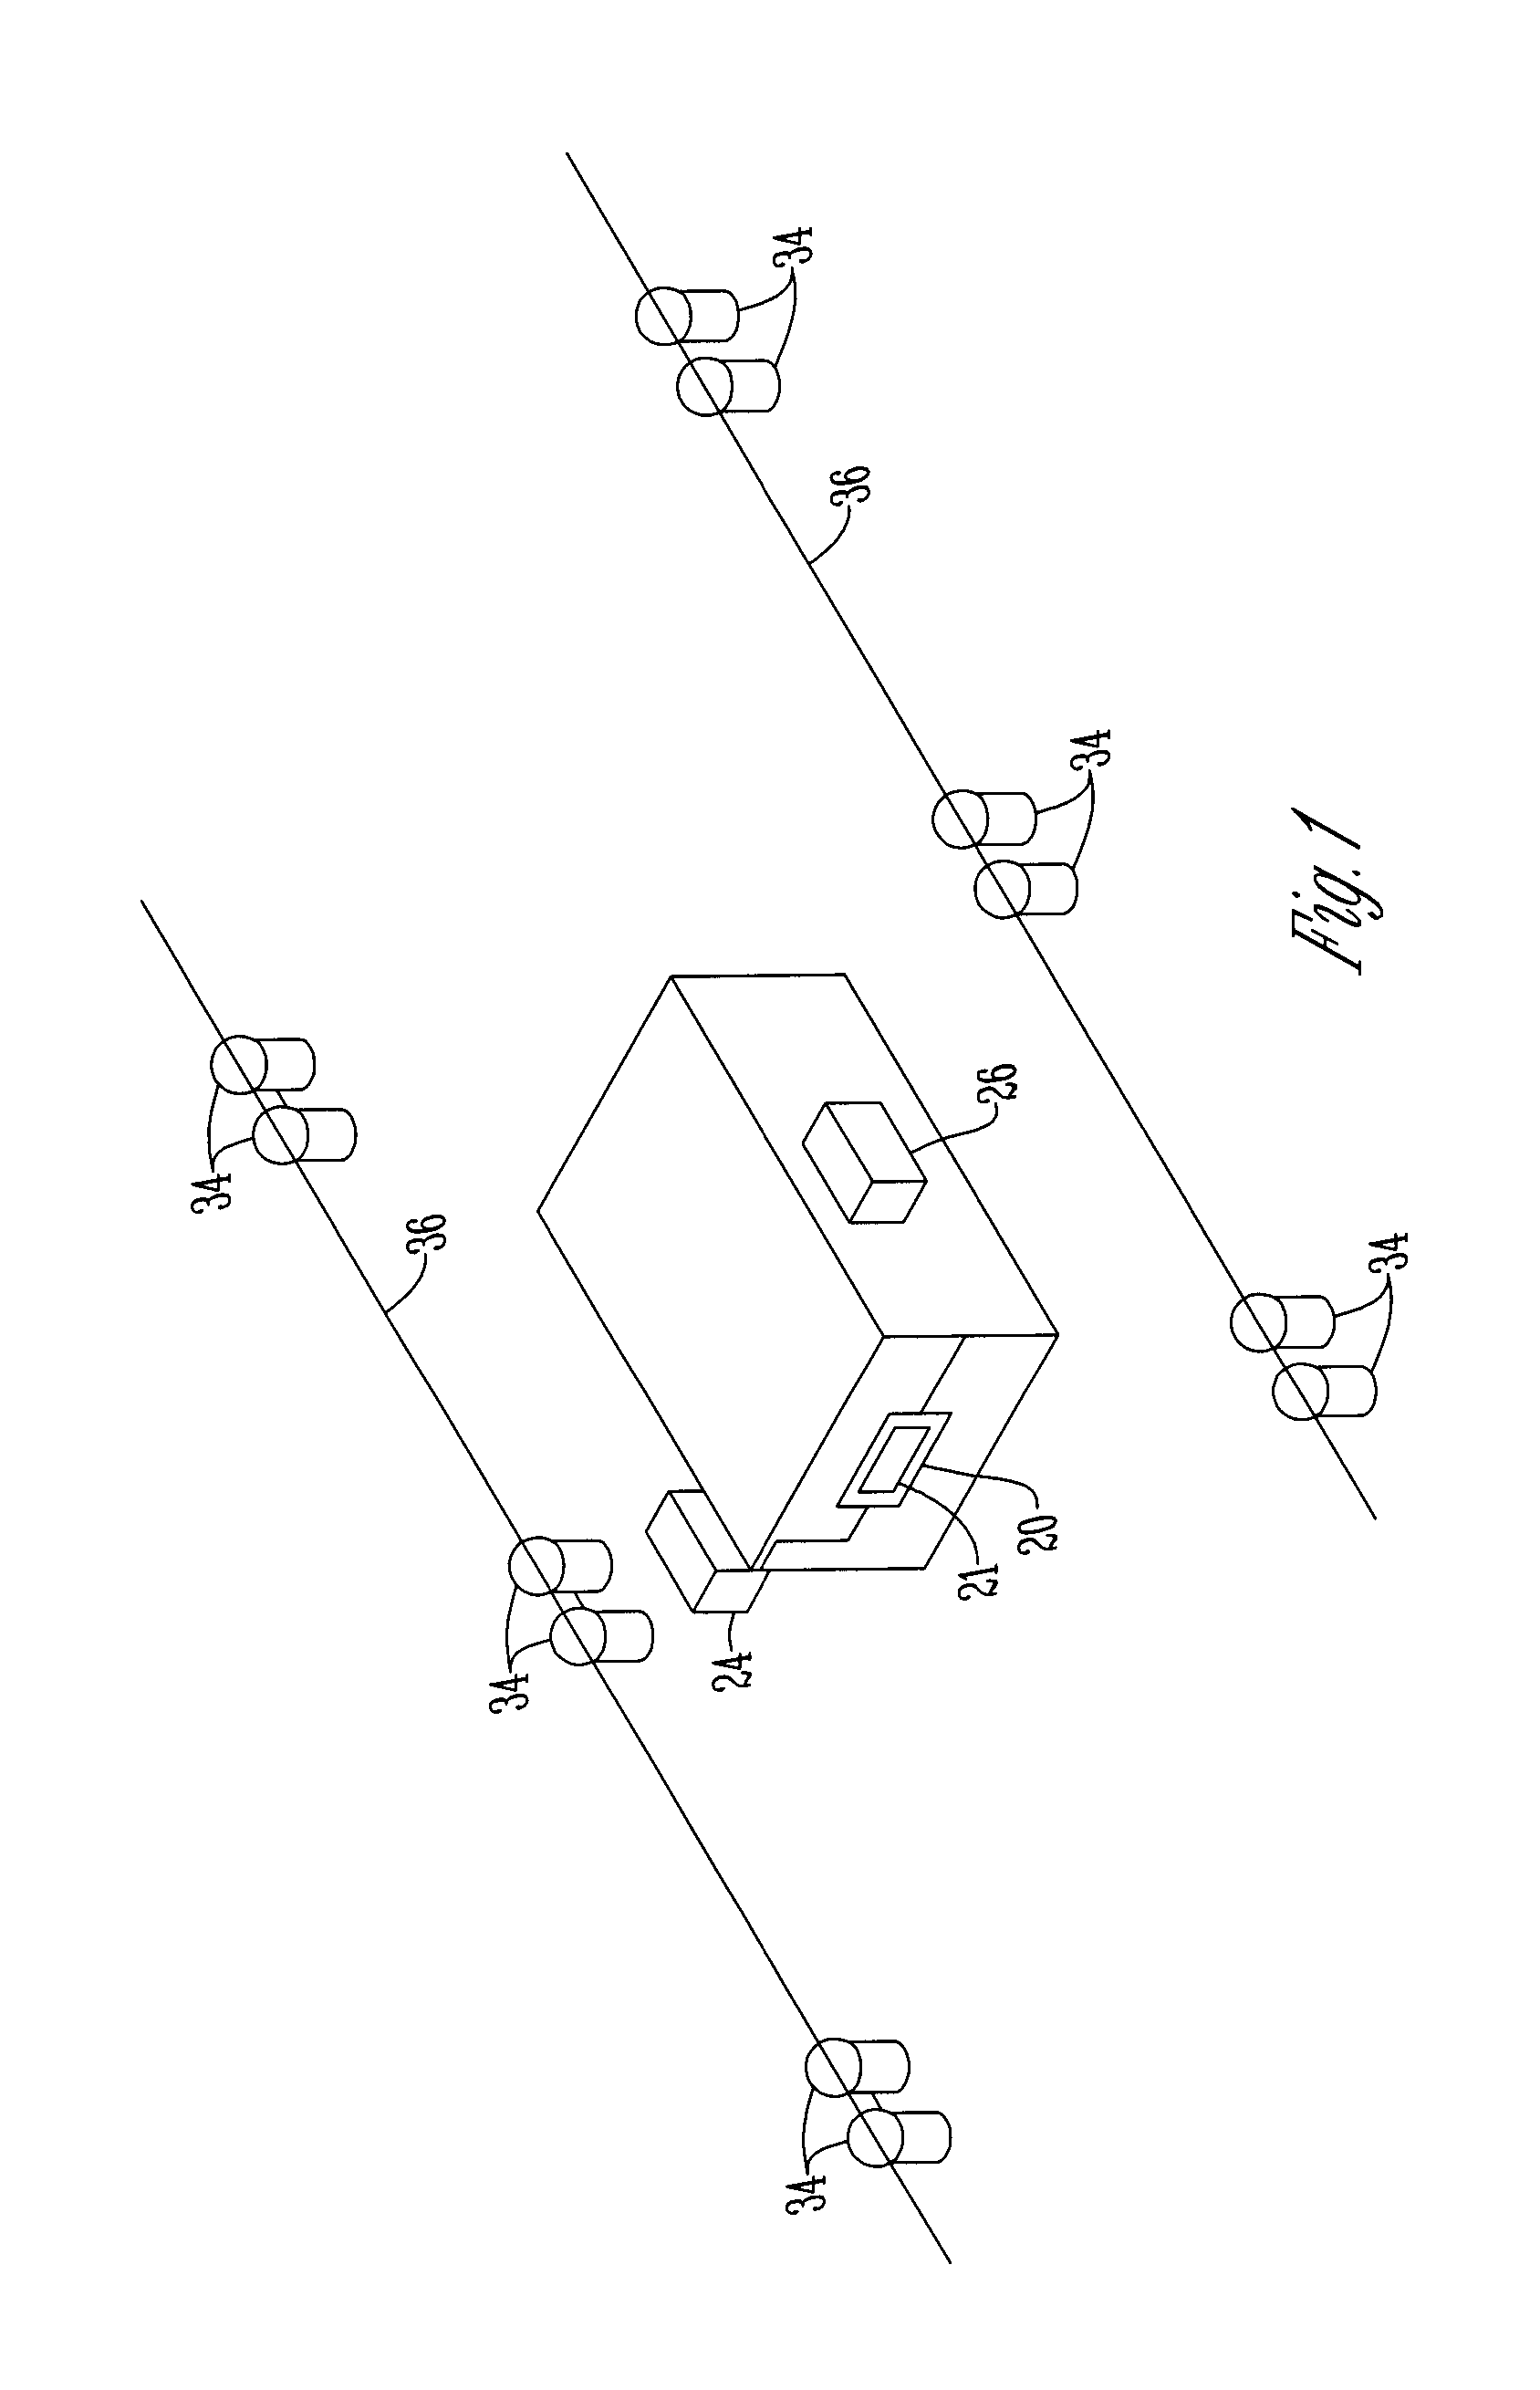 Sensing system for an automated vehicle